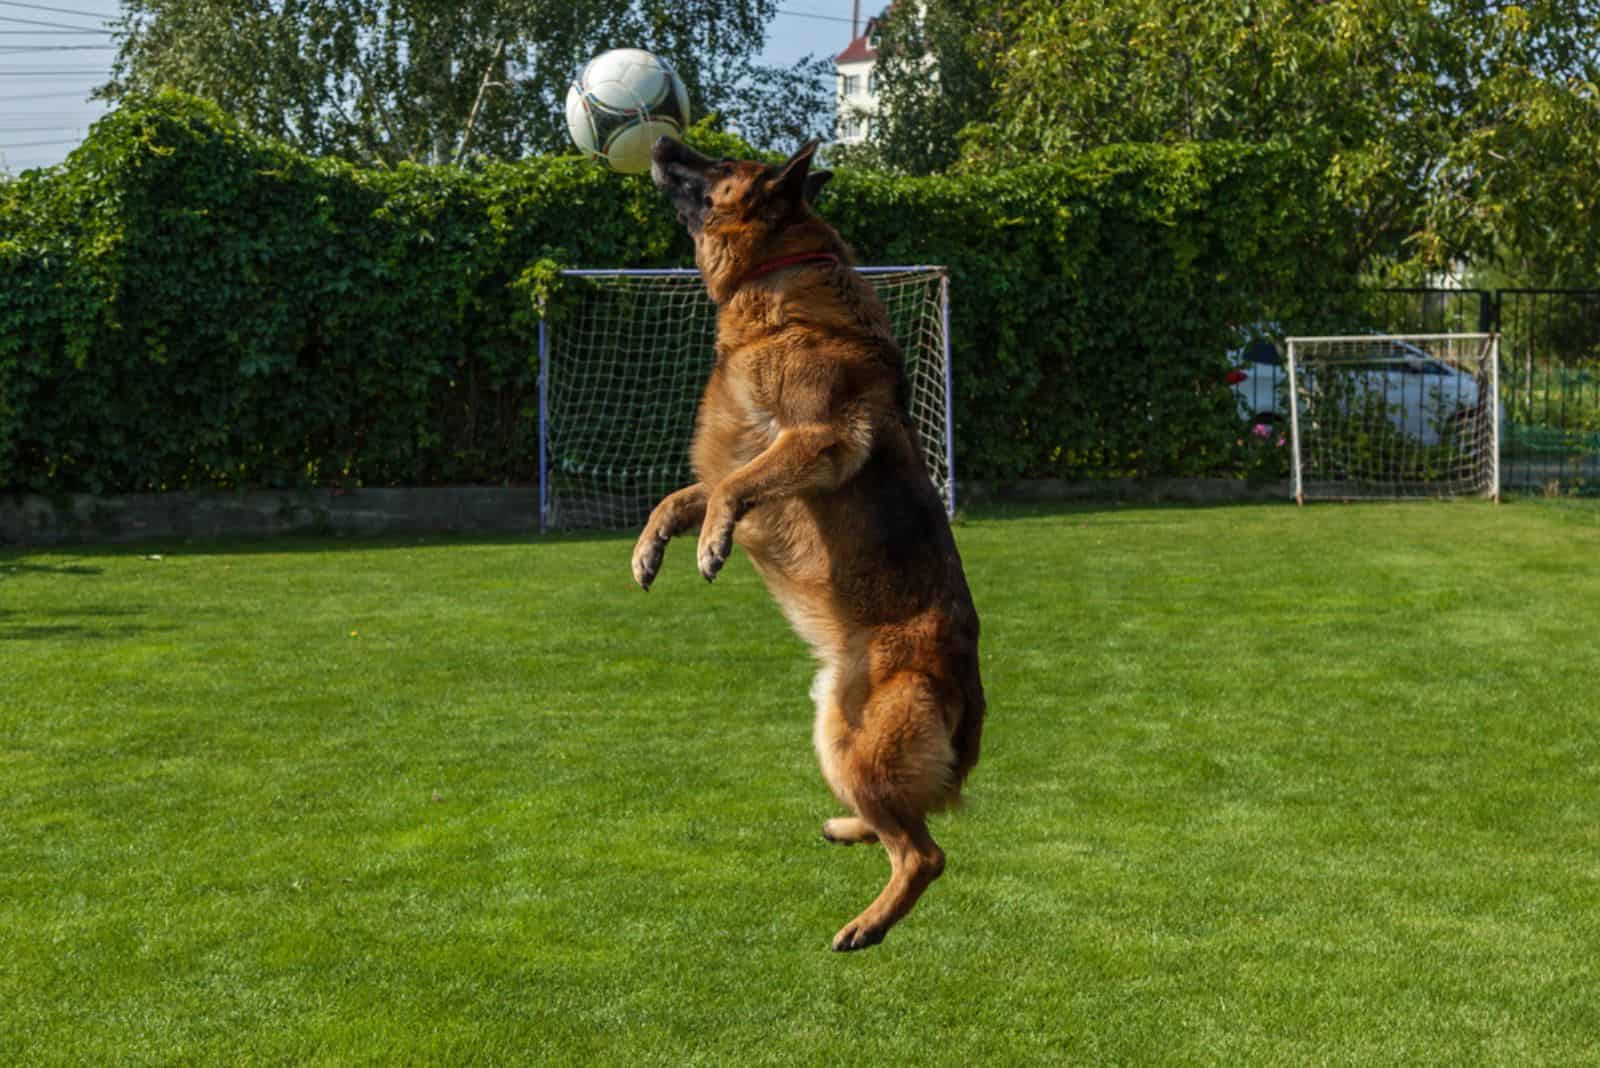 the dog catches the ball in a jump